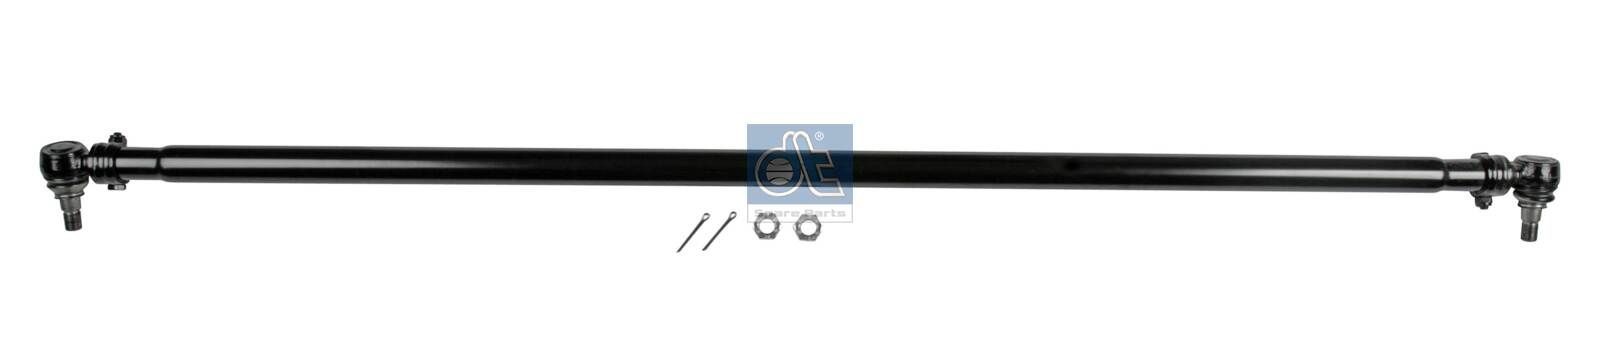 DT Spare Parts 4.63738 Rod Assembly A 676 330 09 03